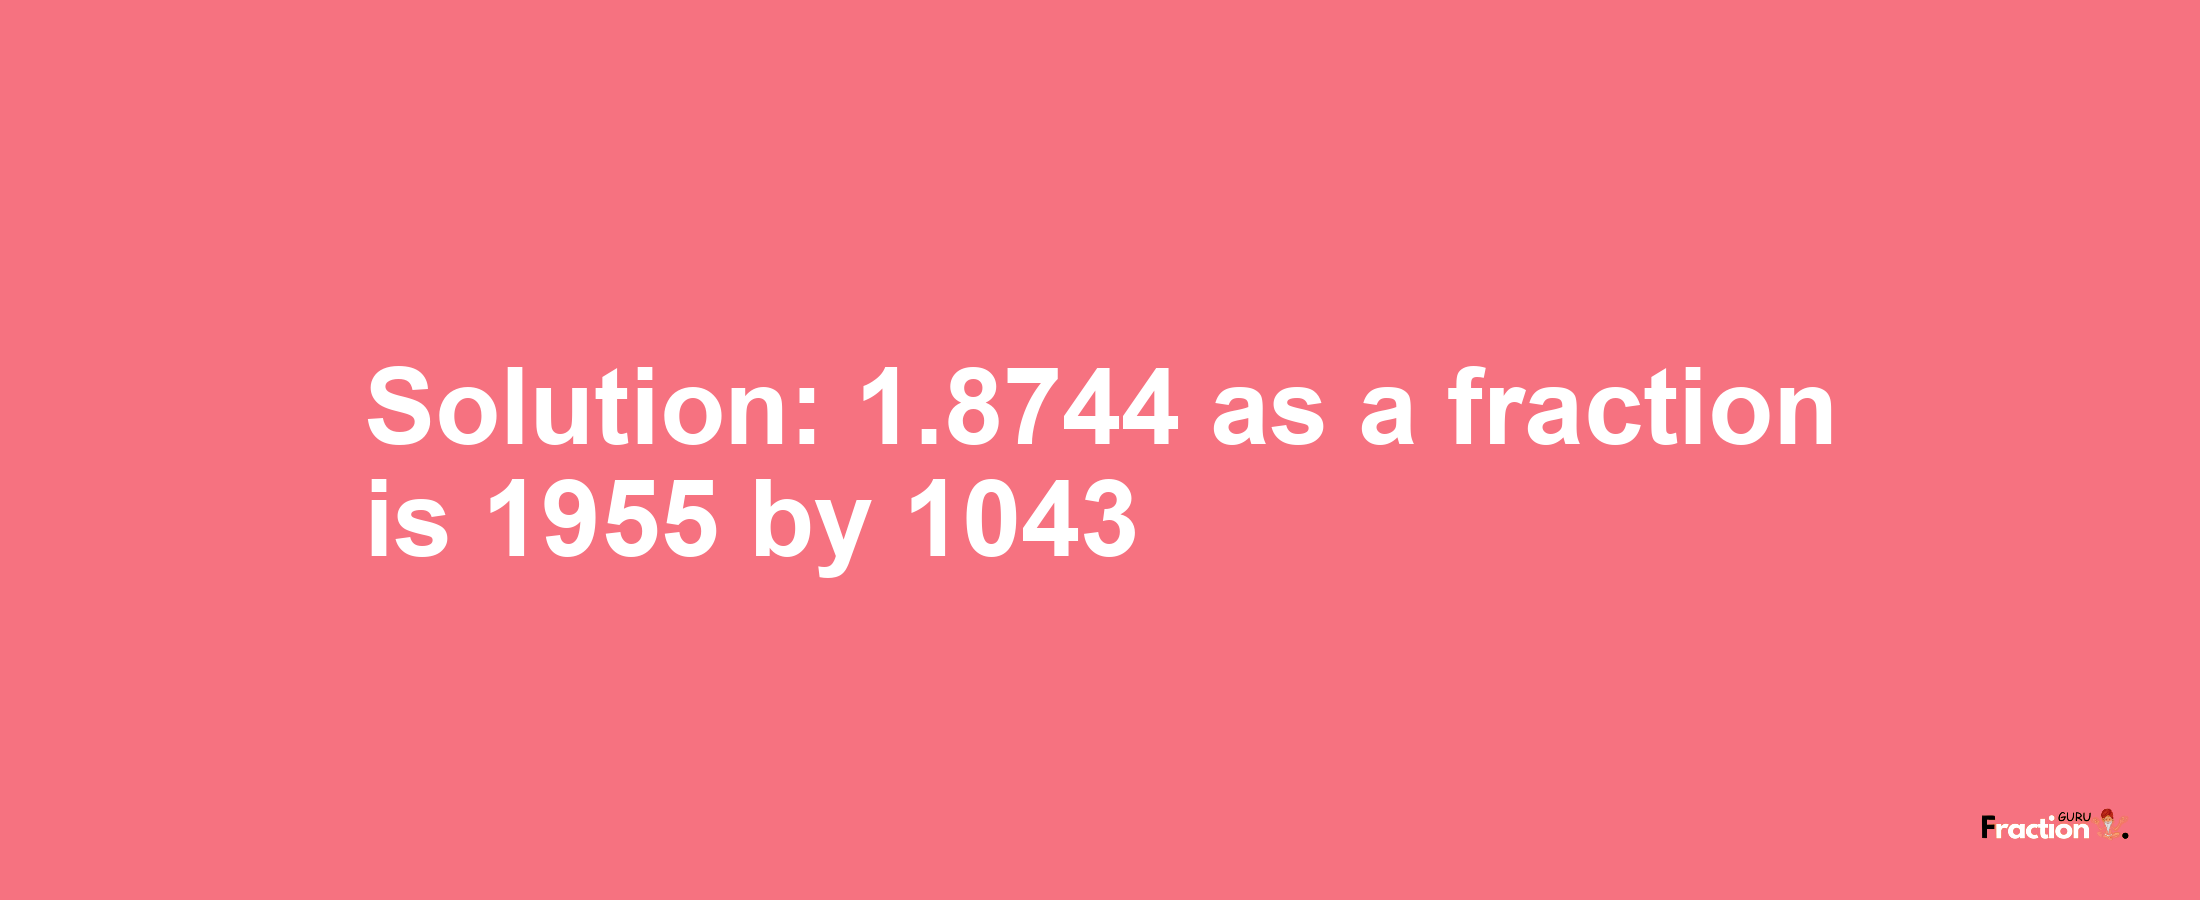 Solution:1.8744 as a fraction is 1955/1043